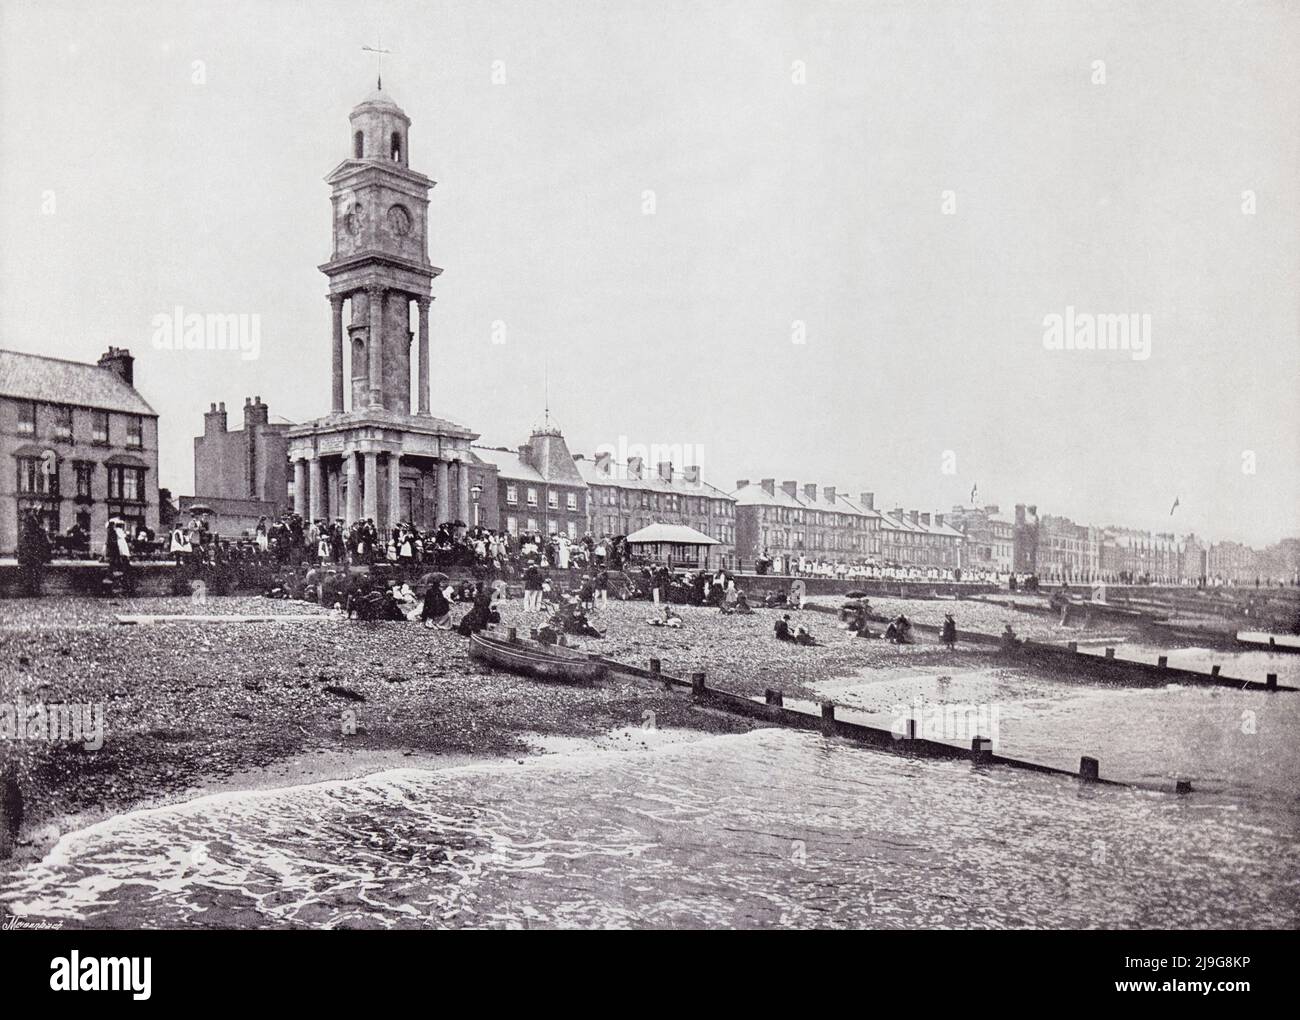 Herne Bay, Kent, England, showing the promenade and the clock tower in the 19th century.  From Around The Coast,  An Album of Pictures from Photographs of the Chief Seaside Places of Interest in Great Britain and Ireland published London, 1895, by George Newnes Limited. Stock Photo